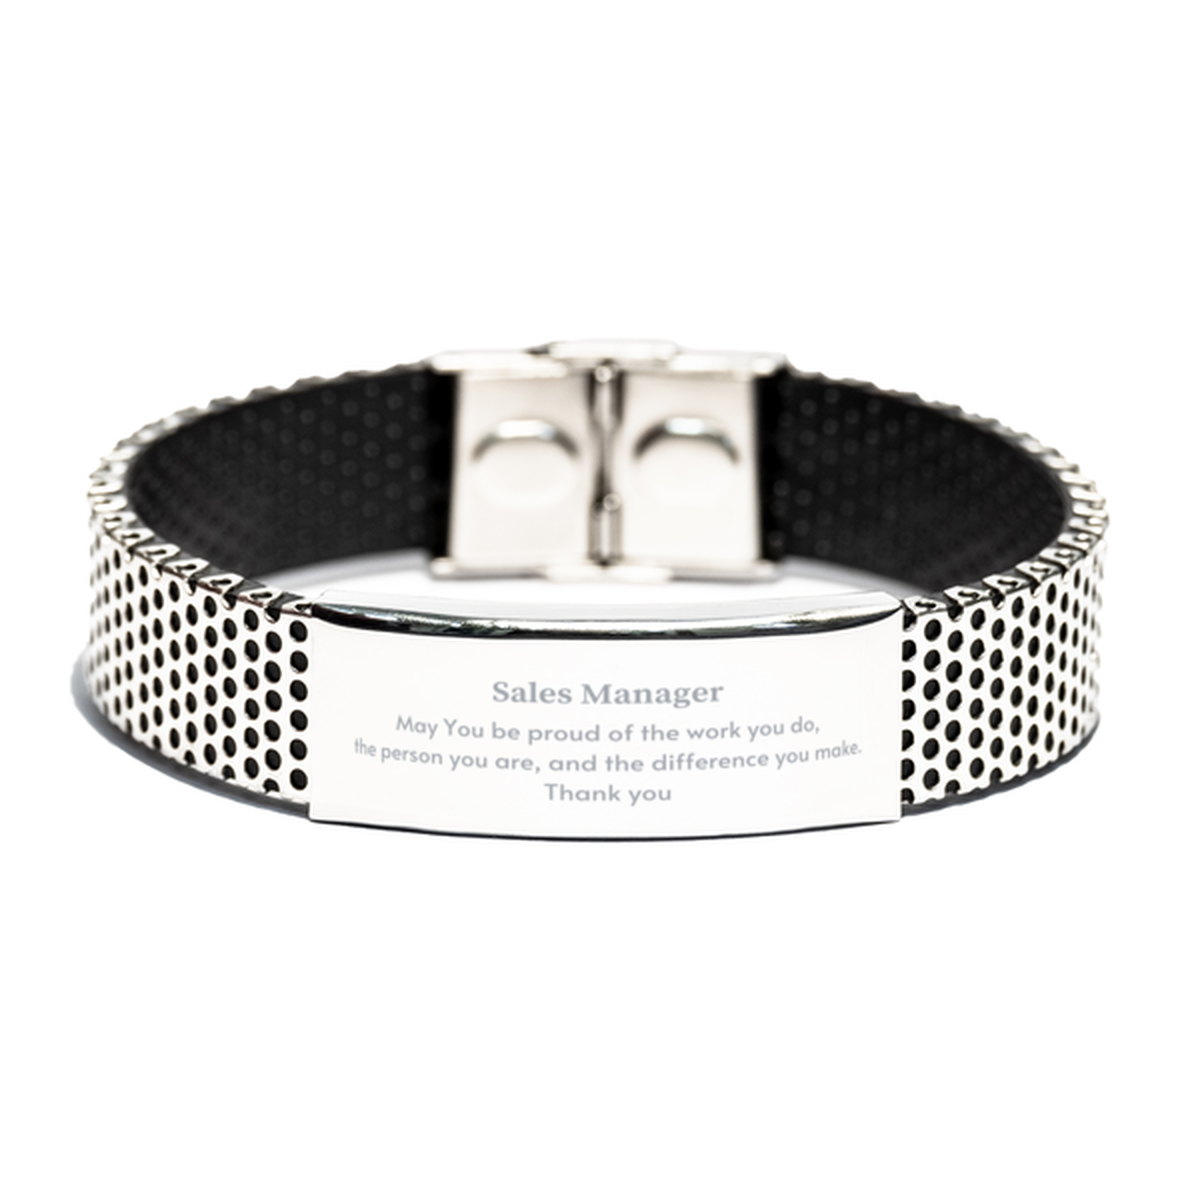 Heartwarming Stainless Steel Bracelet Retirement Coworkers Gifts for Sales Manager, Sales Manager May You be proud of the work you do, the person you are Gifts for Boss Men Women Friends